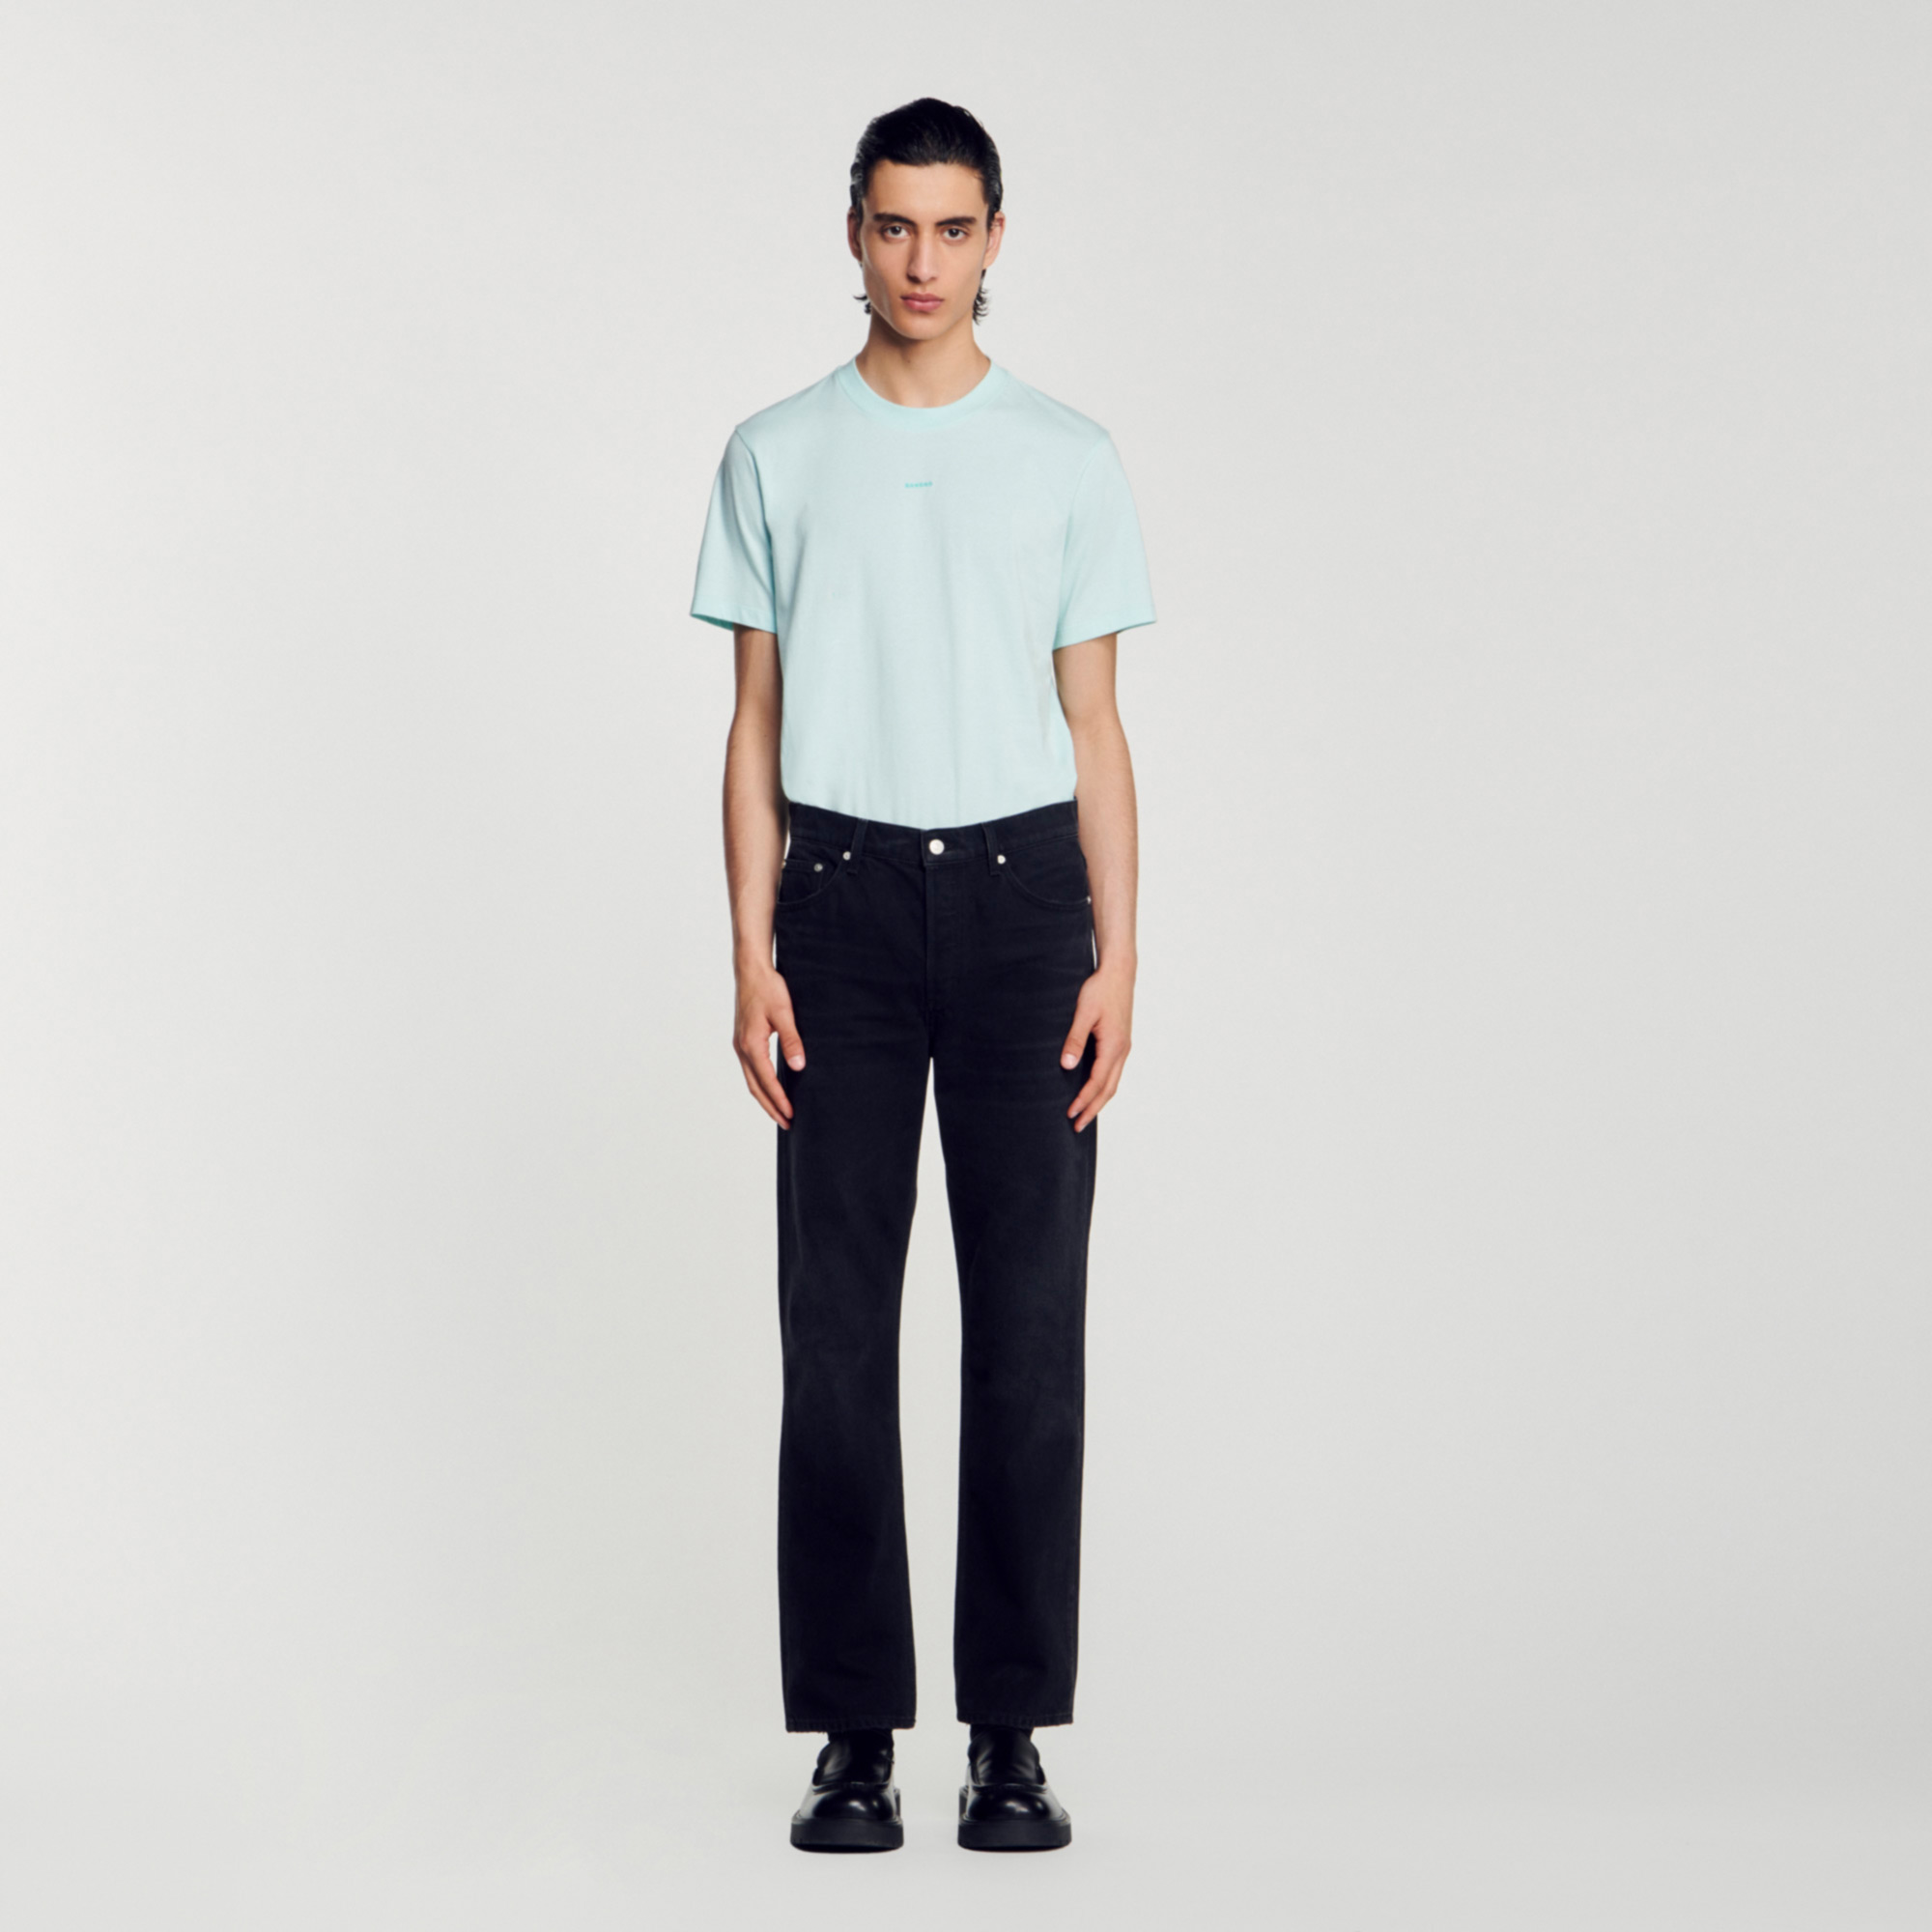 Sandro cotton Rib: Round-neck short-sleeved T-shirt with Sandro embroidery on the front